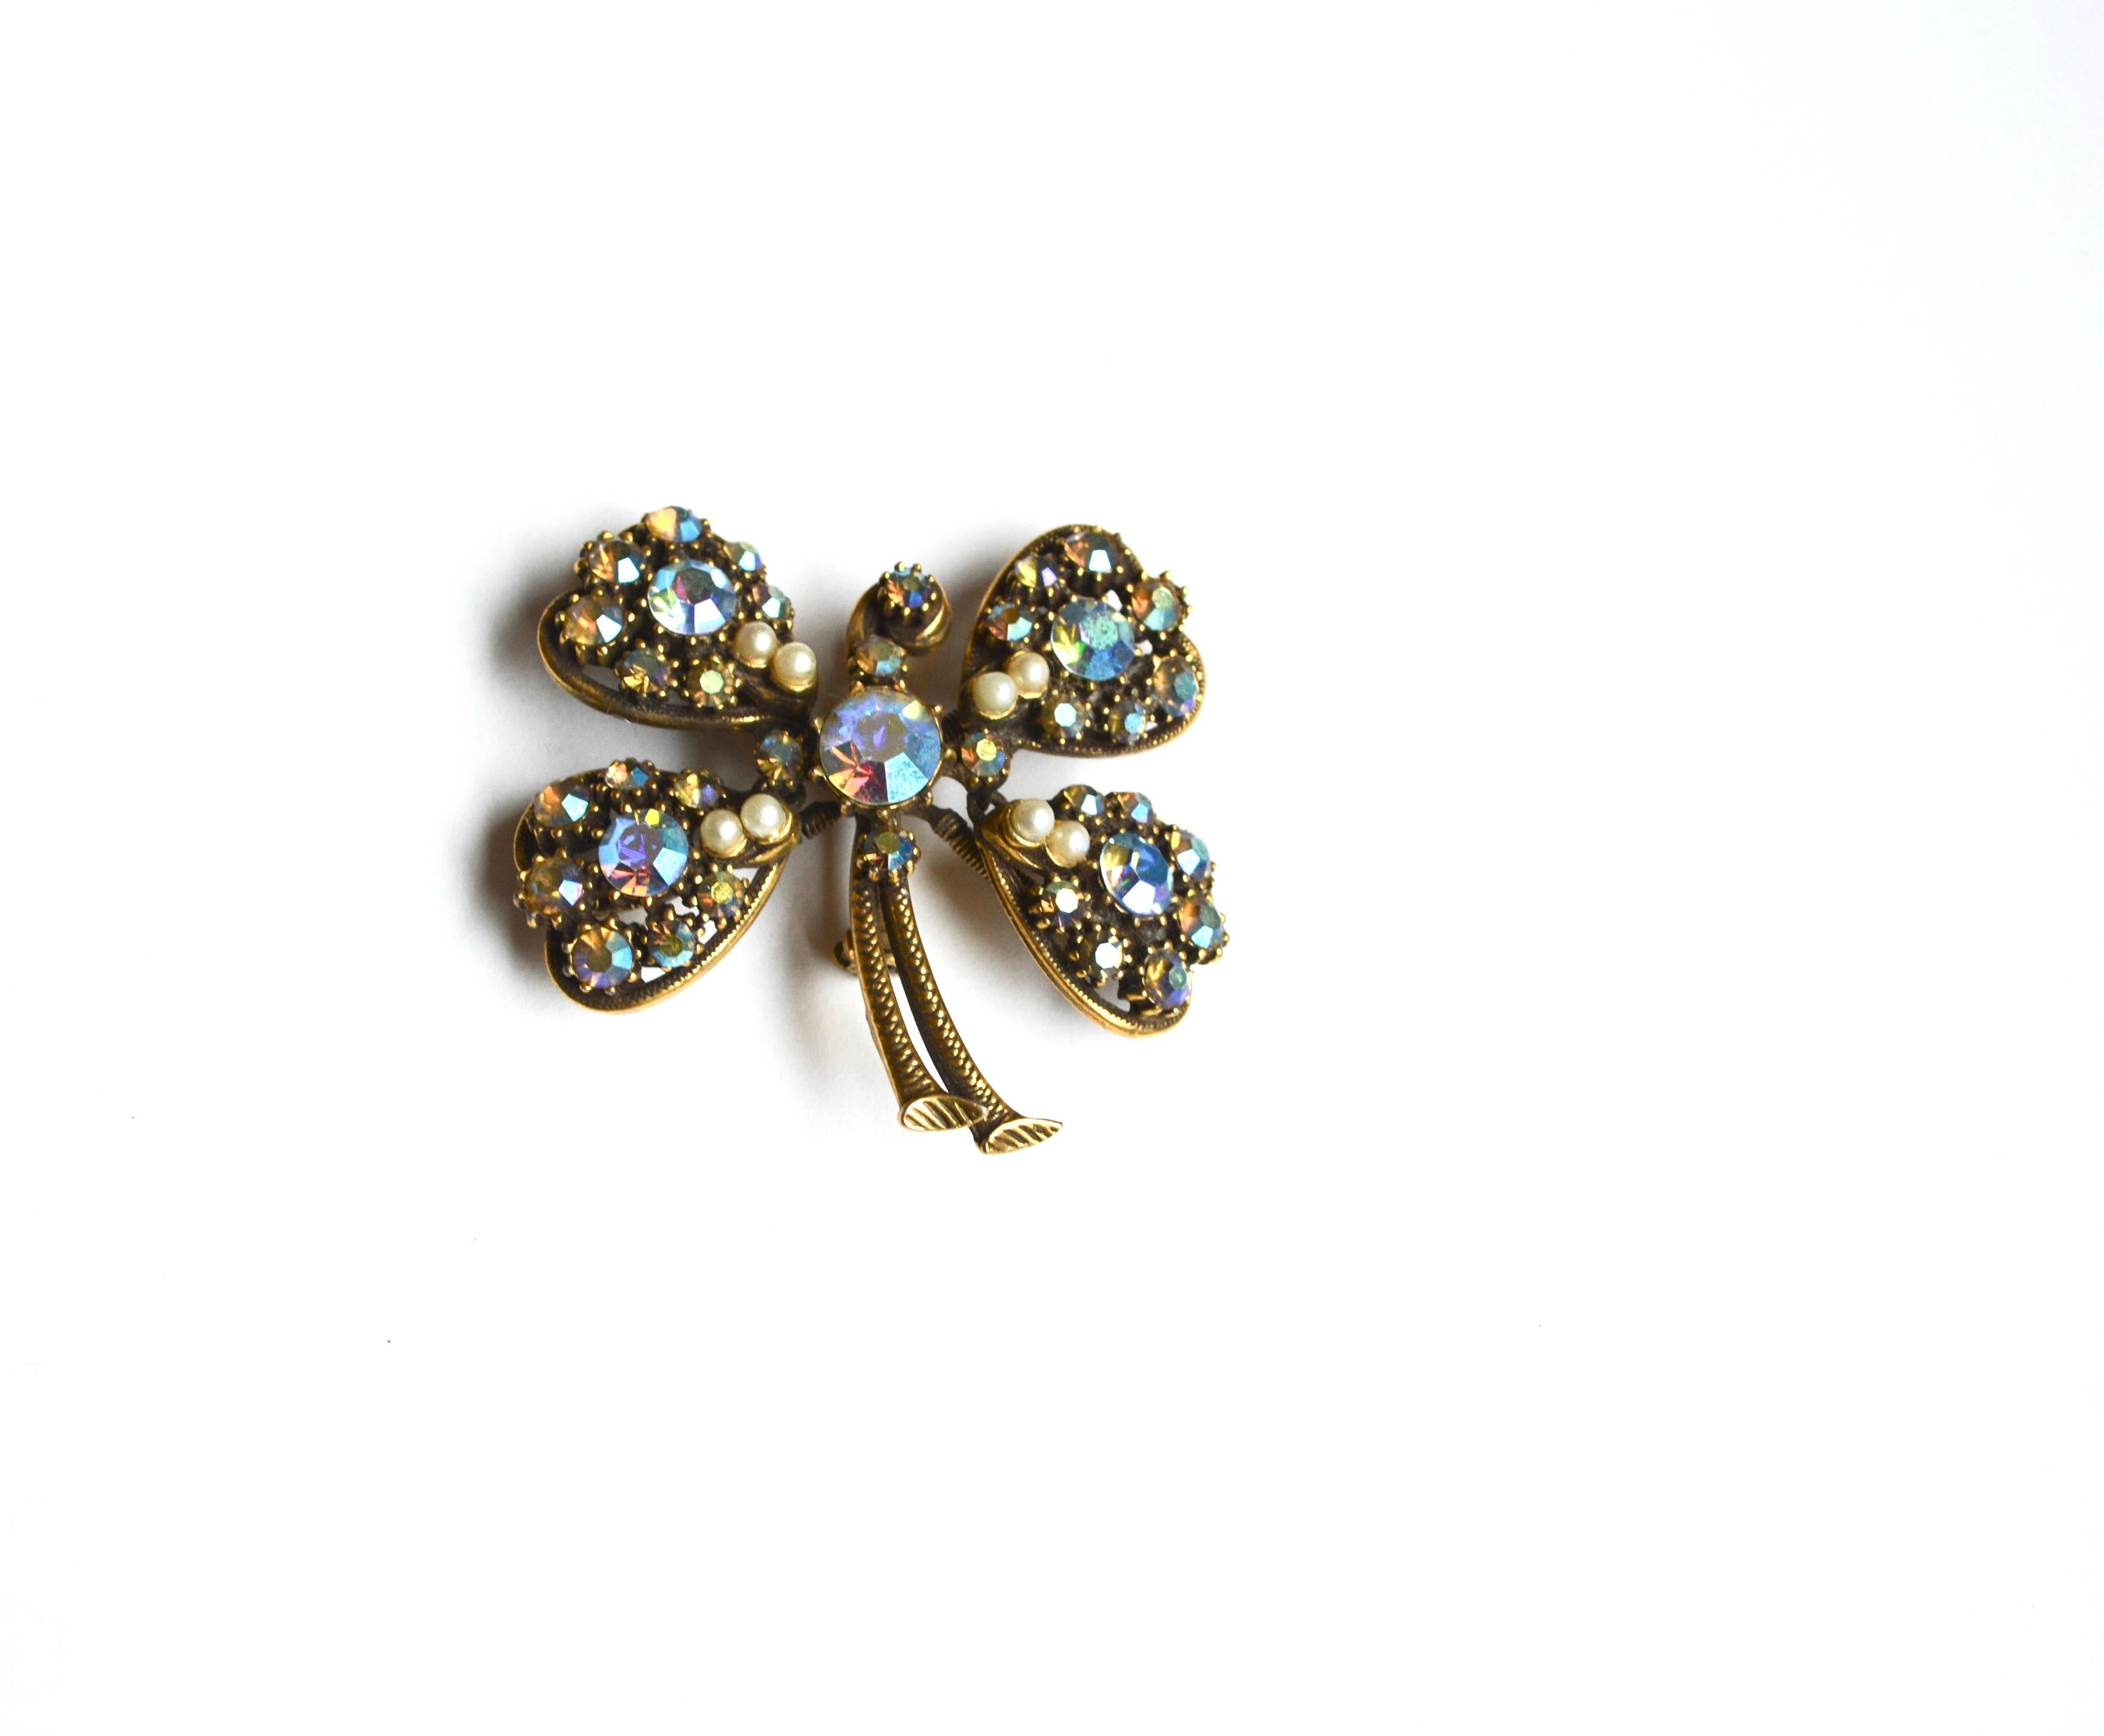 1960s aurora borealis clover trembler brooch by Florenza, signed.  Nice size at 2